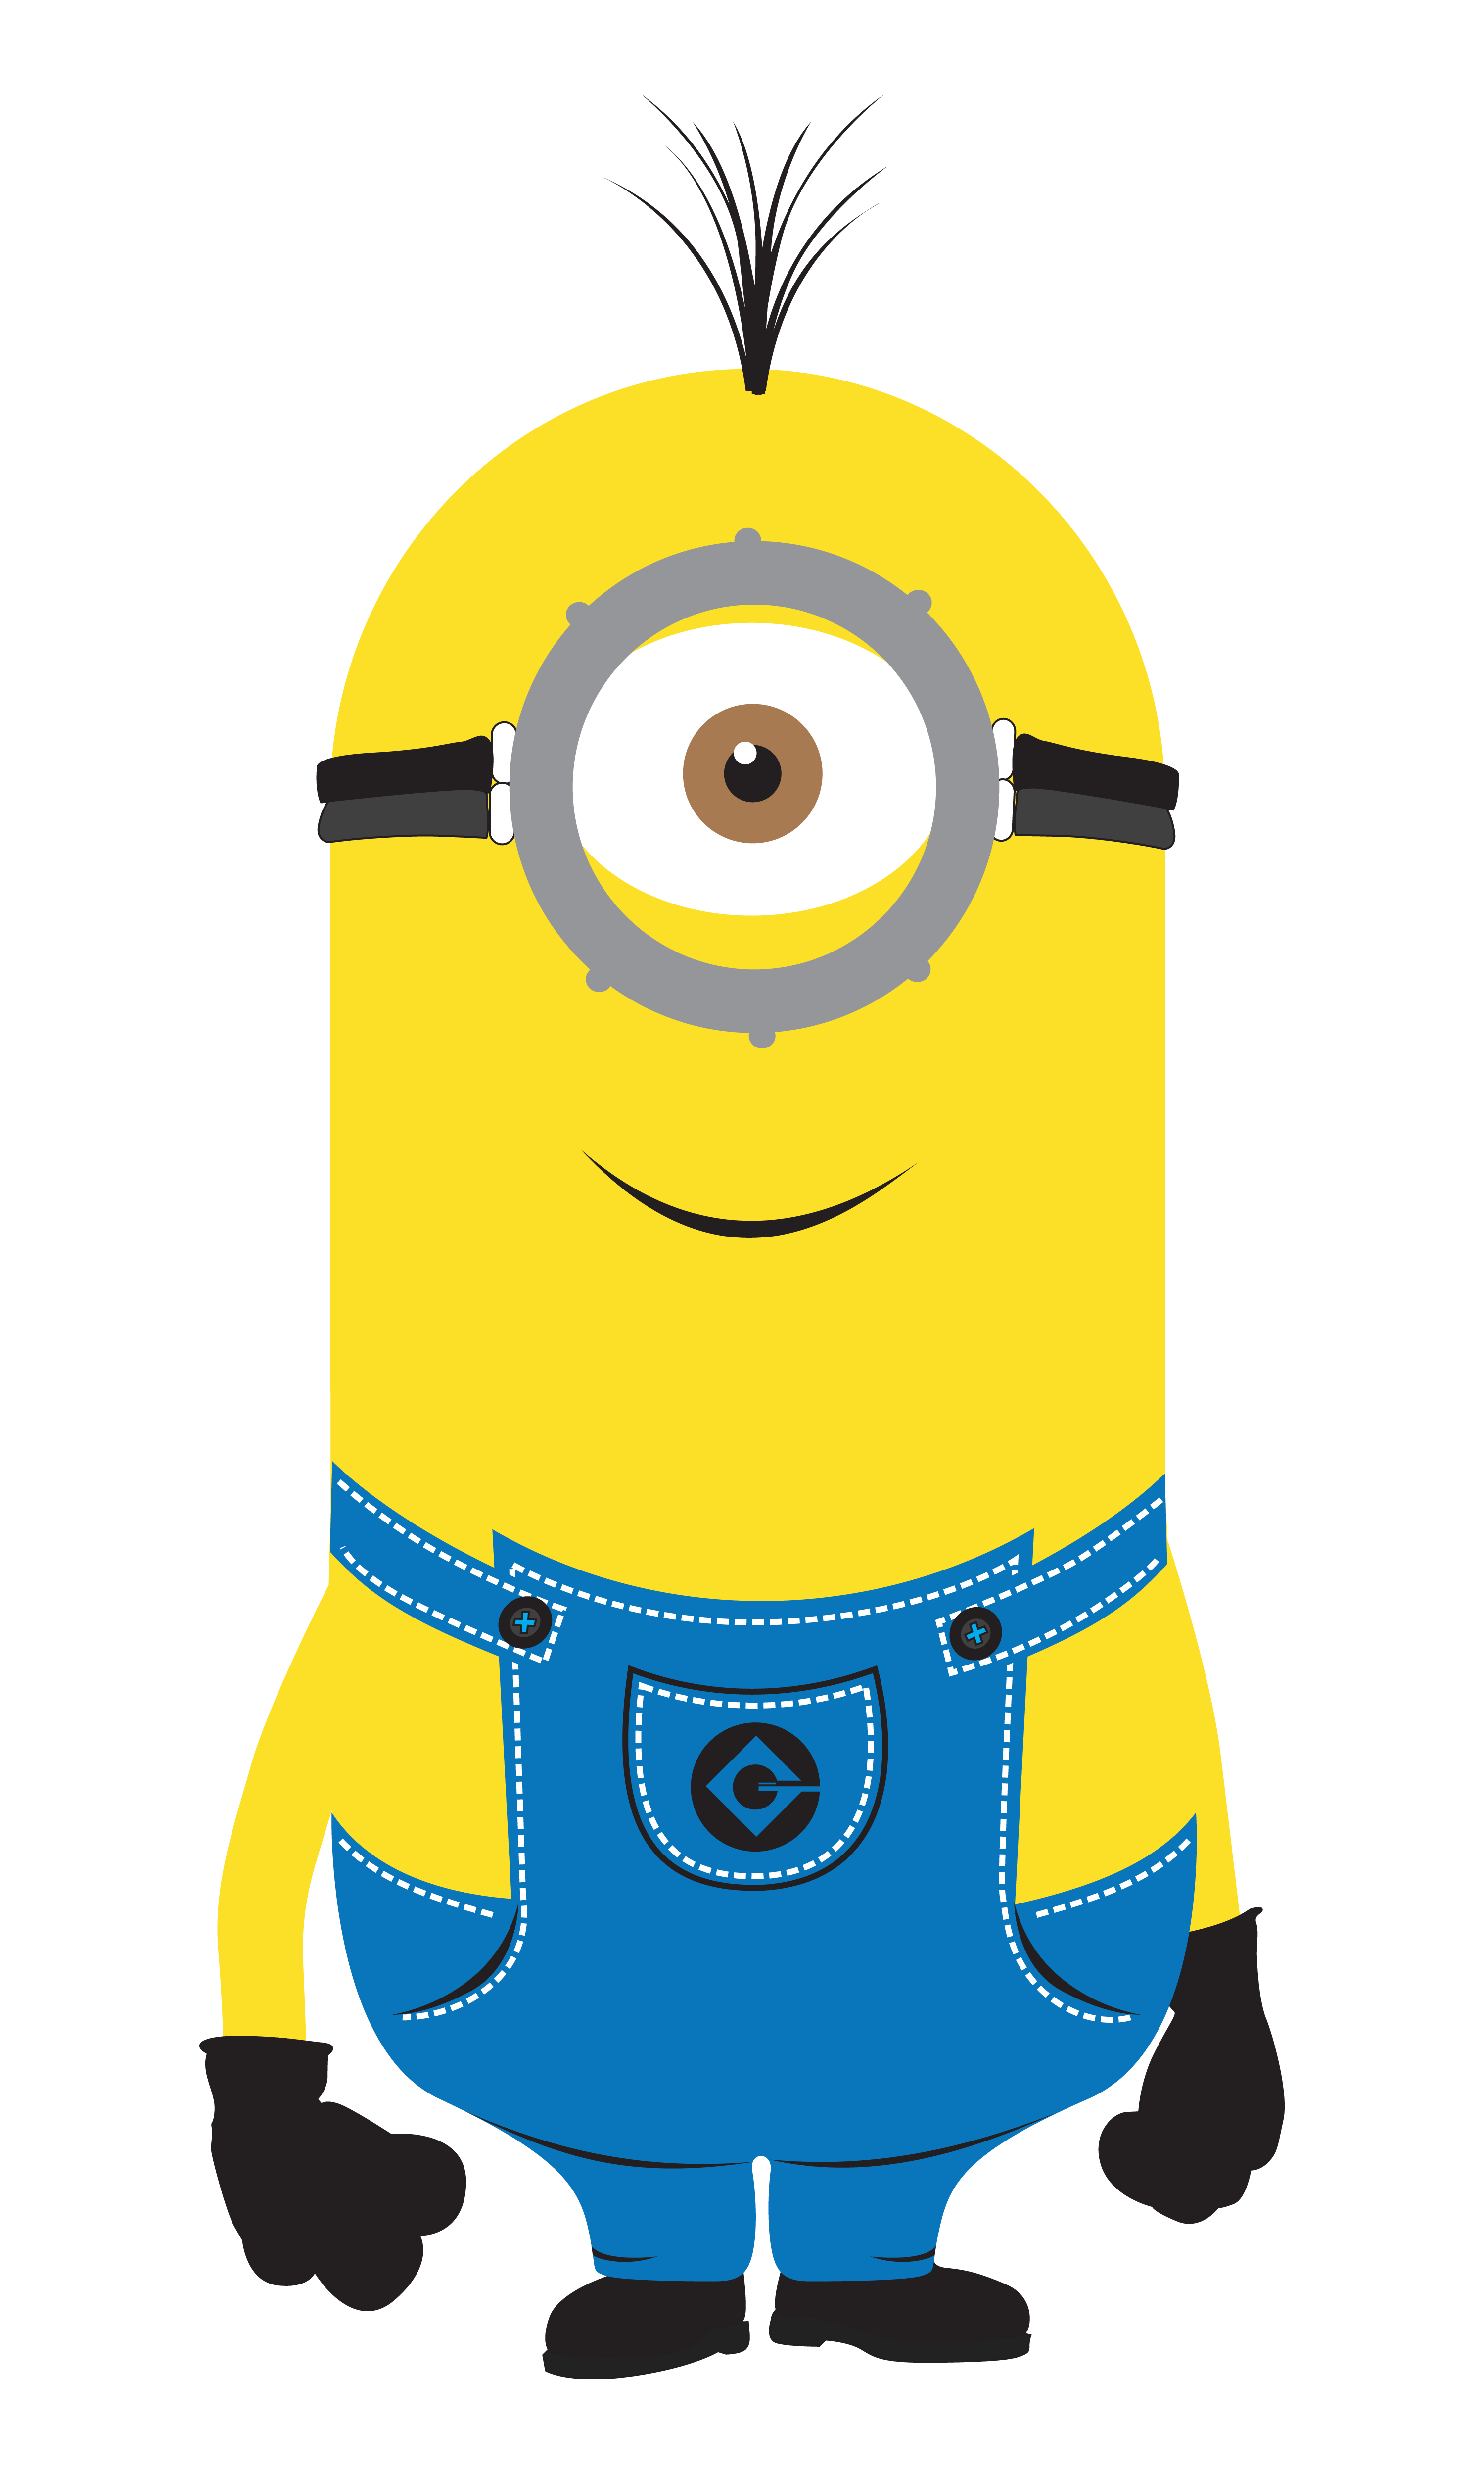 Minion PNG Transparent Background, Free Download #42189 - FreeIconsPNG